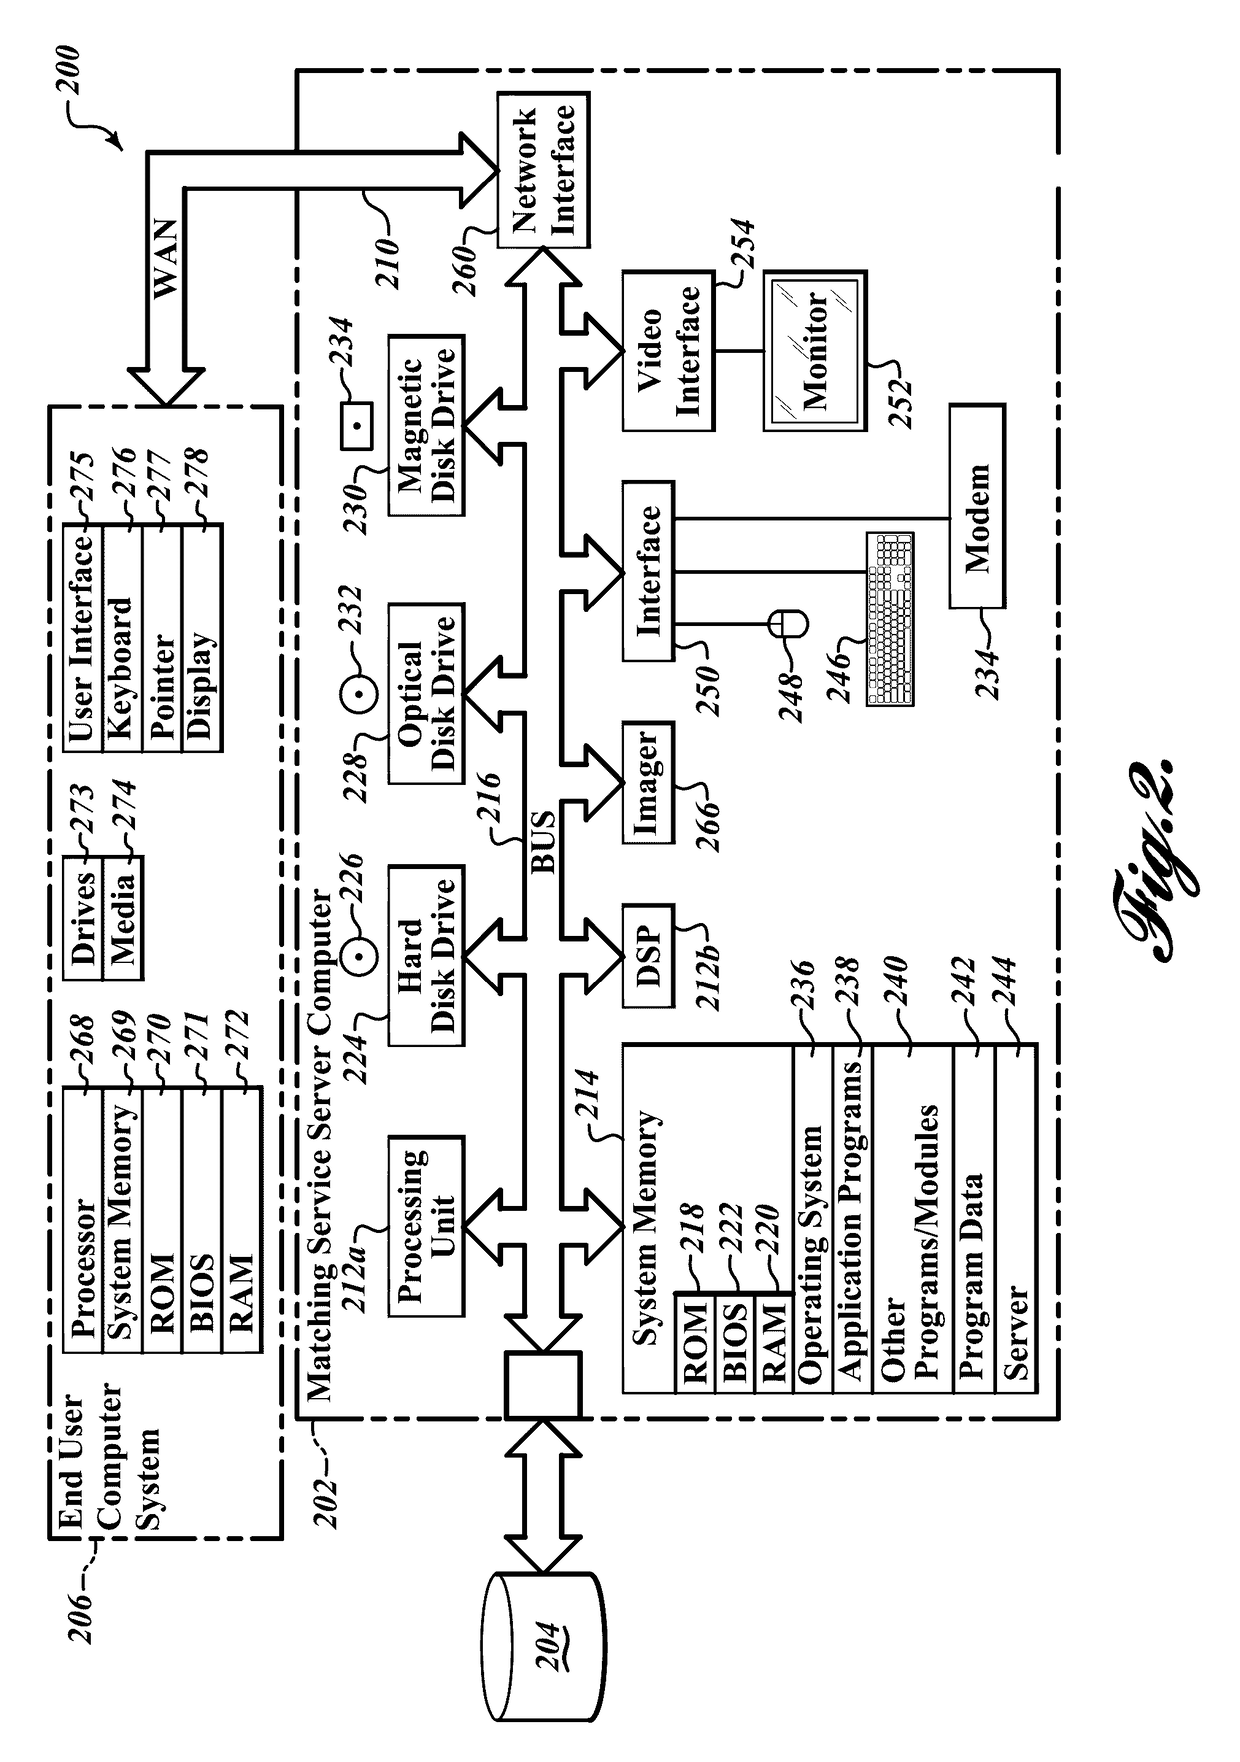 Apparatus, method and article to facilitate matching of clients in a networked environment